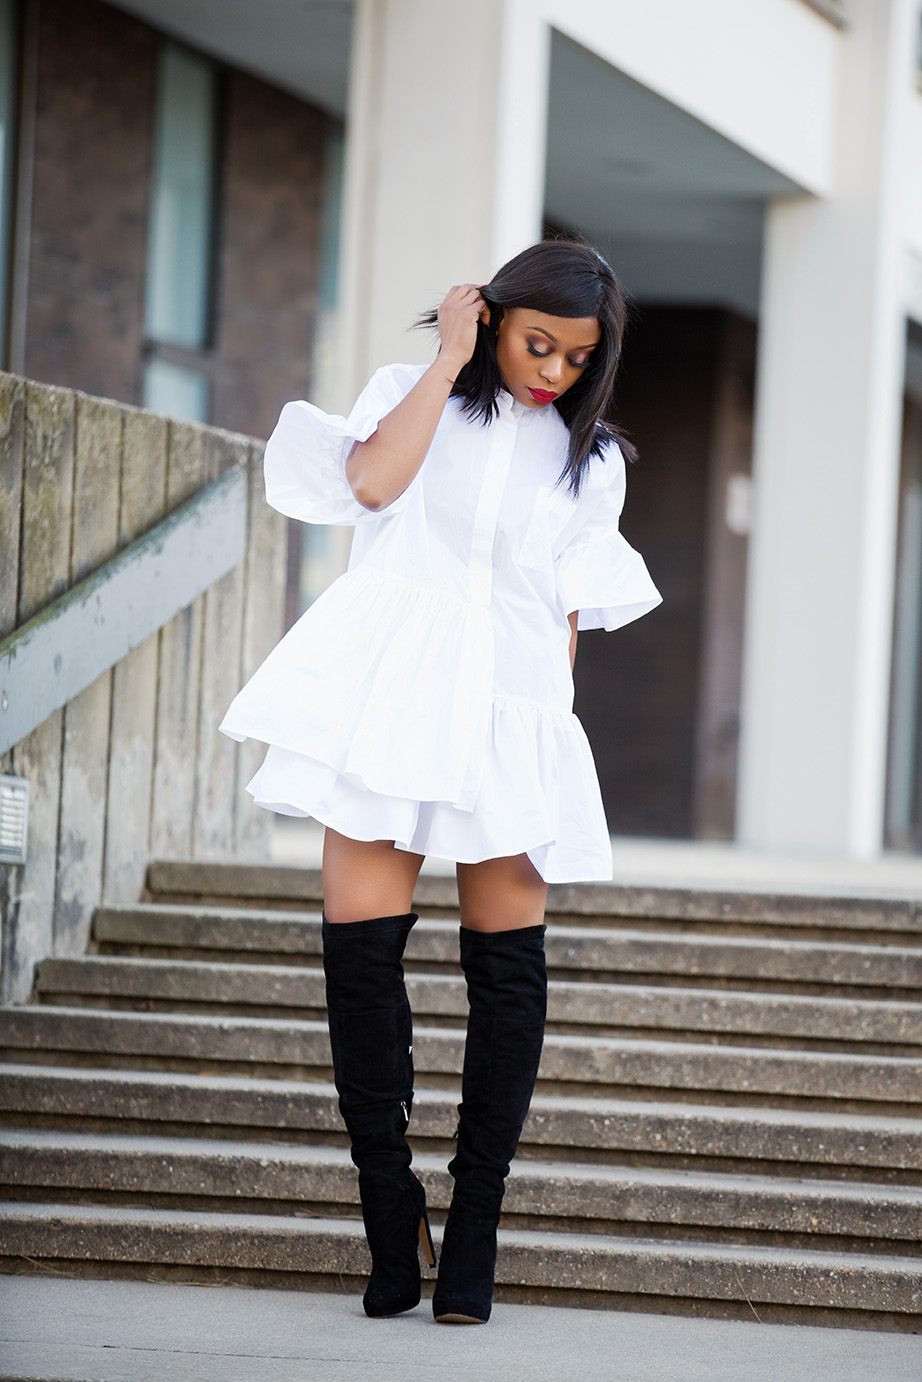 Shirtdress and over the knee boots, www.jadore-fashion.com